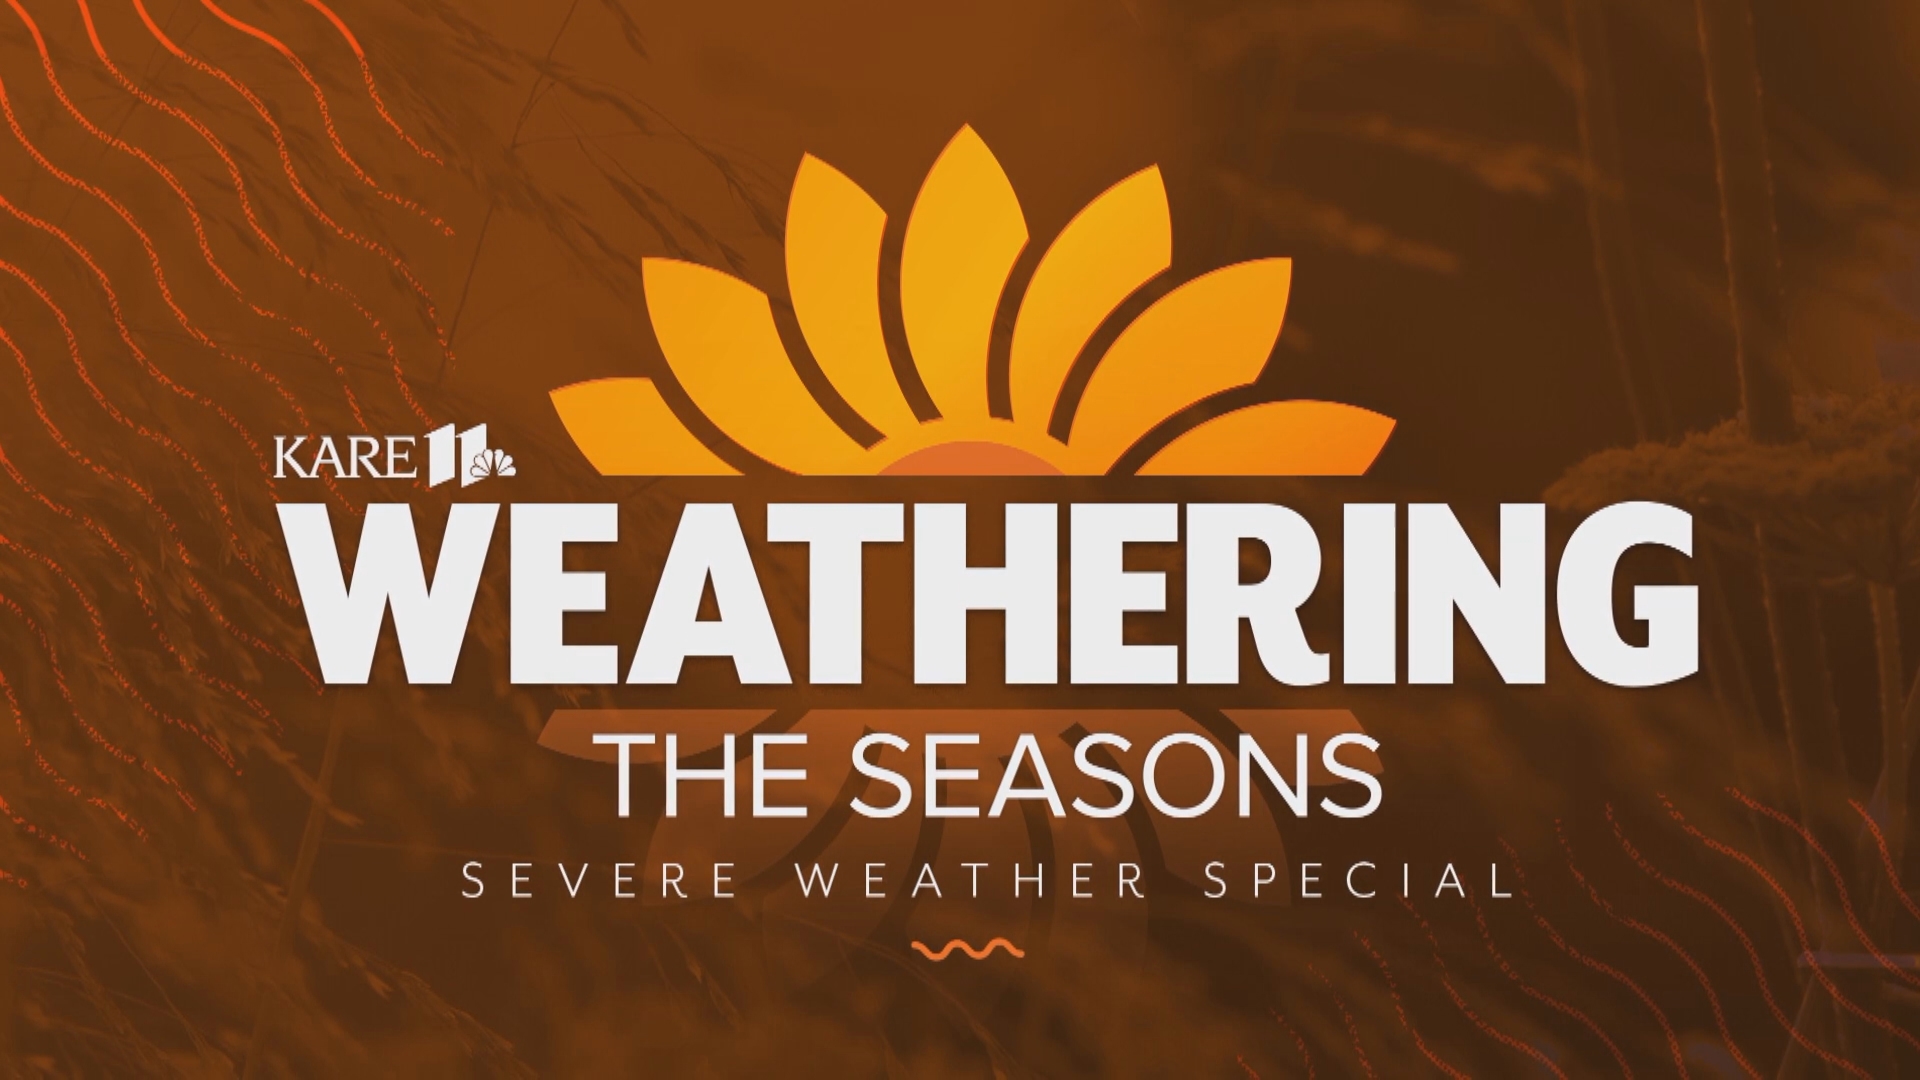 The KARE 11 Weatherminds team shares important information to help your family stay prepared during severe weather season.